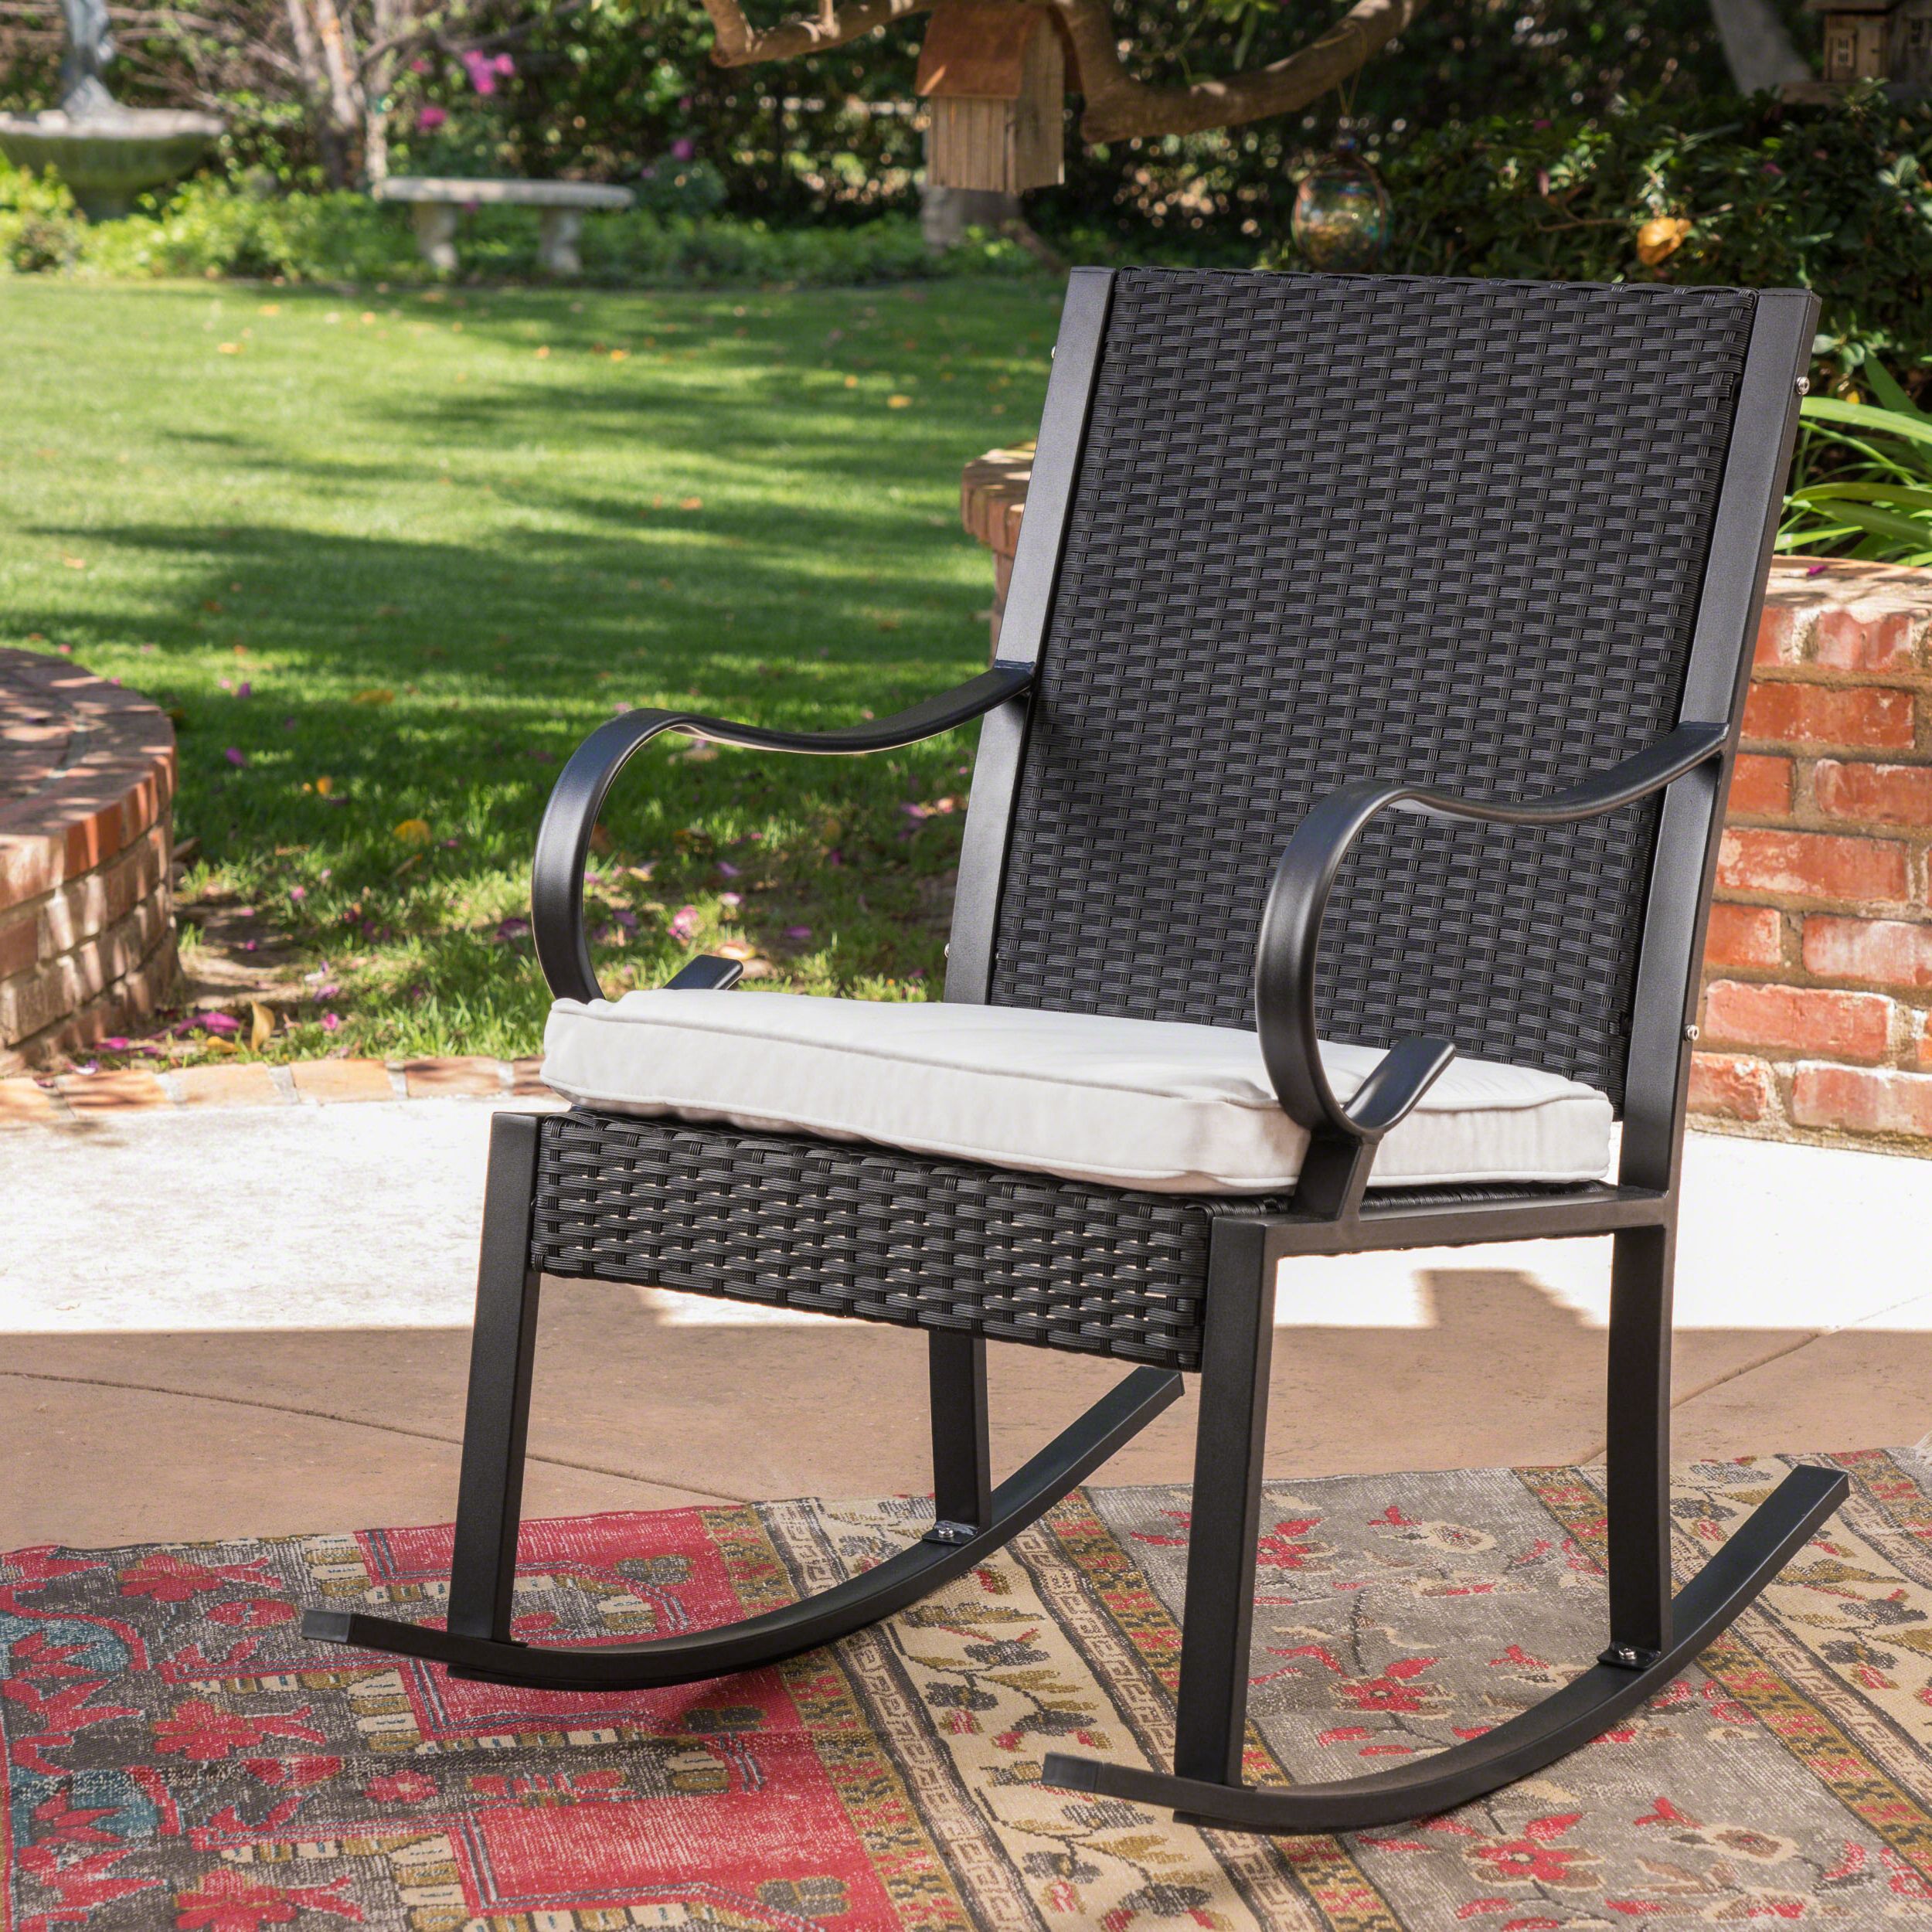 Hayden Outdoor Wicker Rocking Chair With Cushion, White,black – Walmart Pertaining To Newest Dark Natural Rocking Chairs (View 13 of 15)